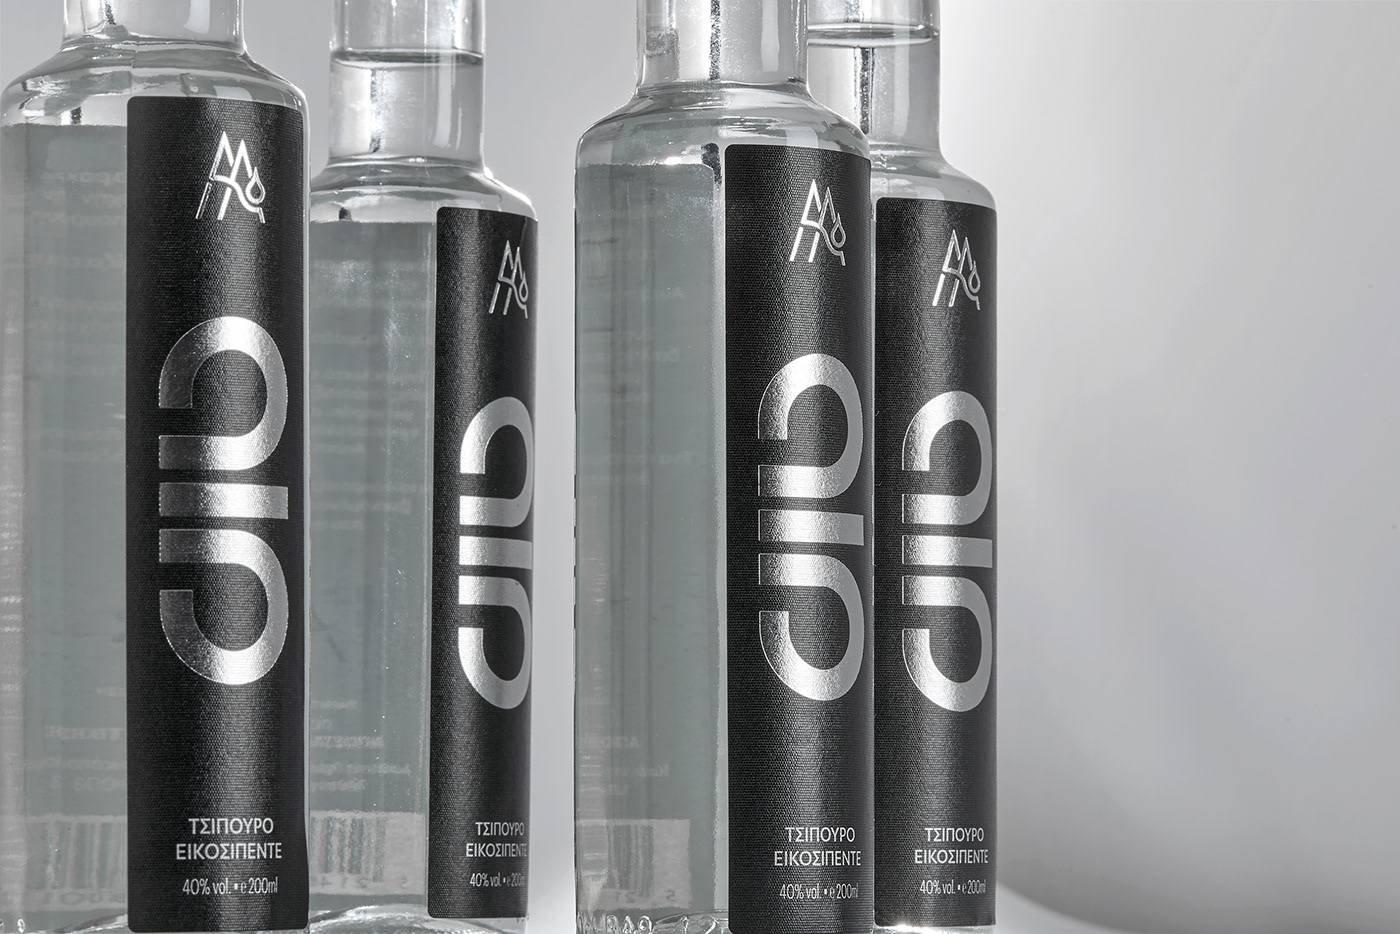 Packaging design tsipouro greek alcohol Label packaging design